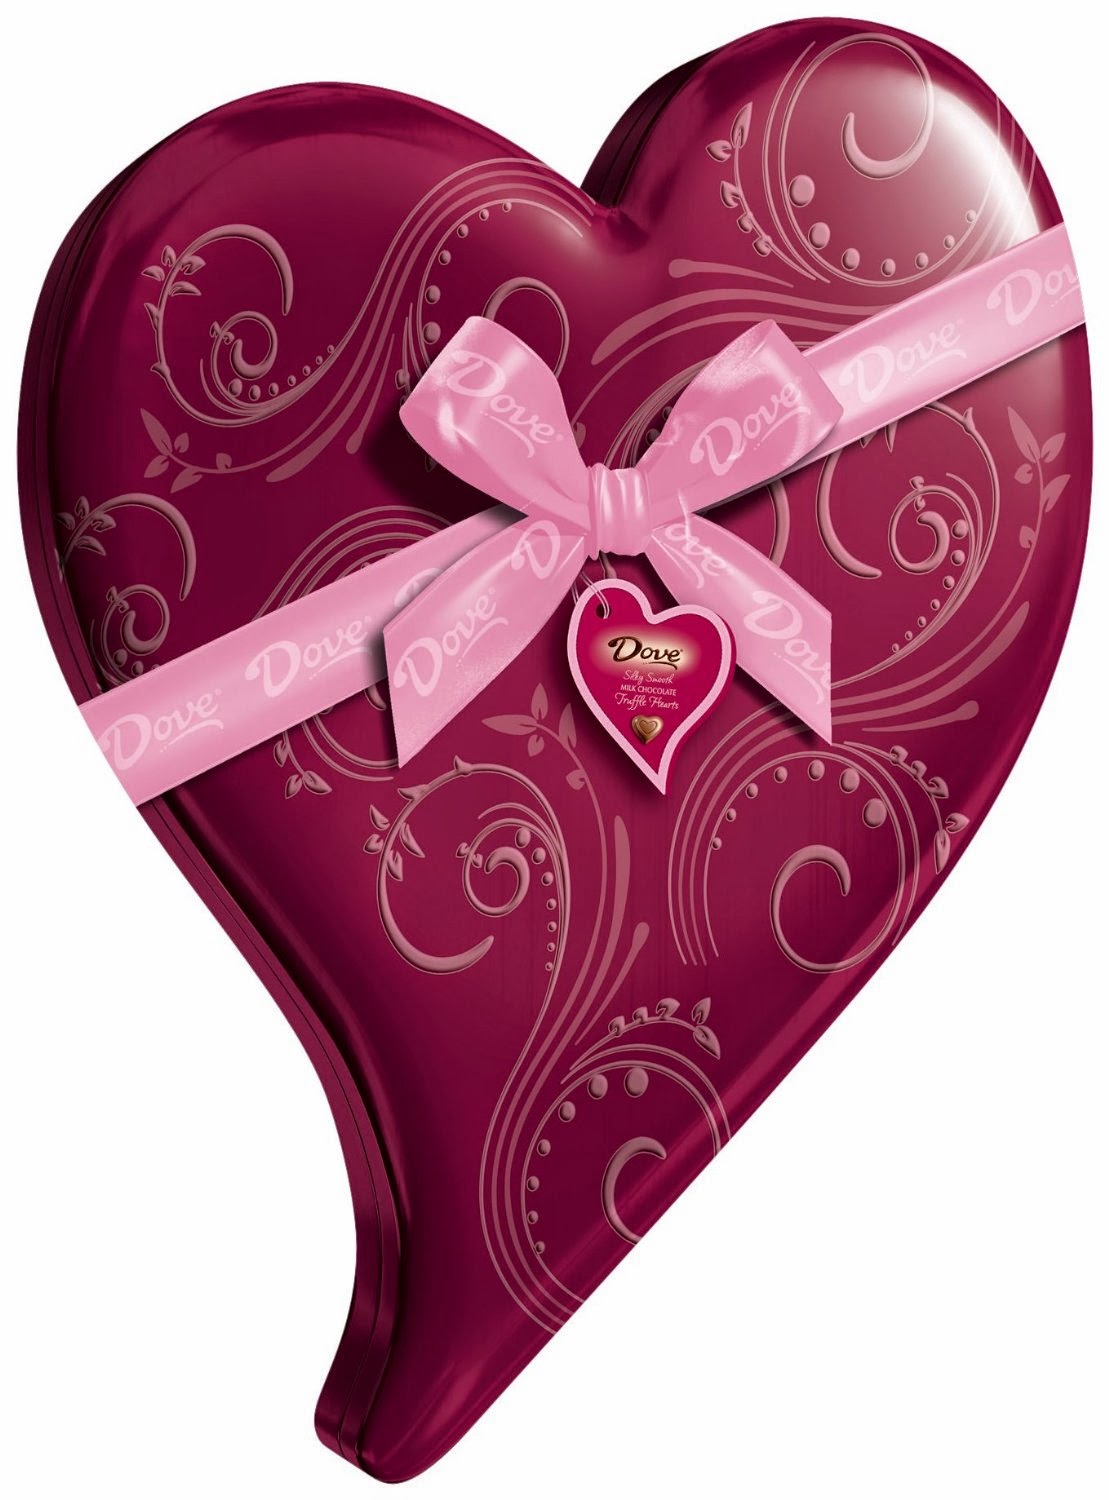 Best chocolate for valentine's day 2015: Best Chocolate list for ...